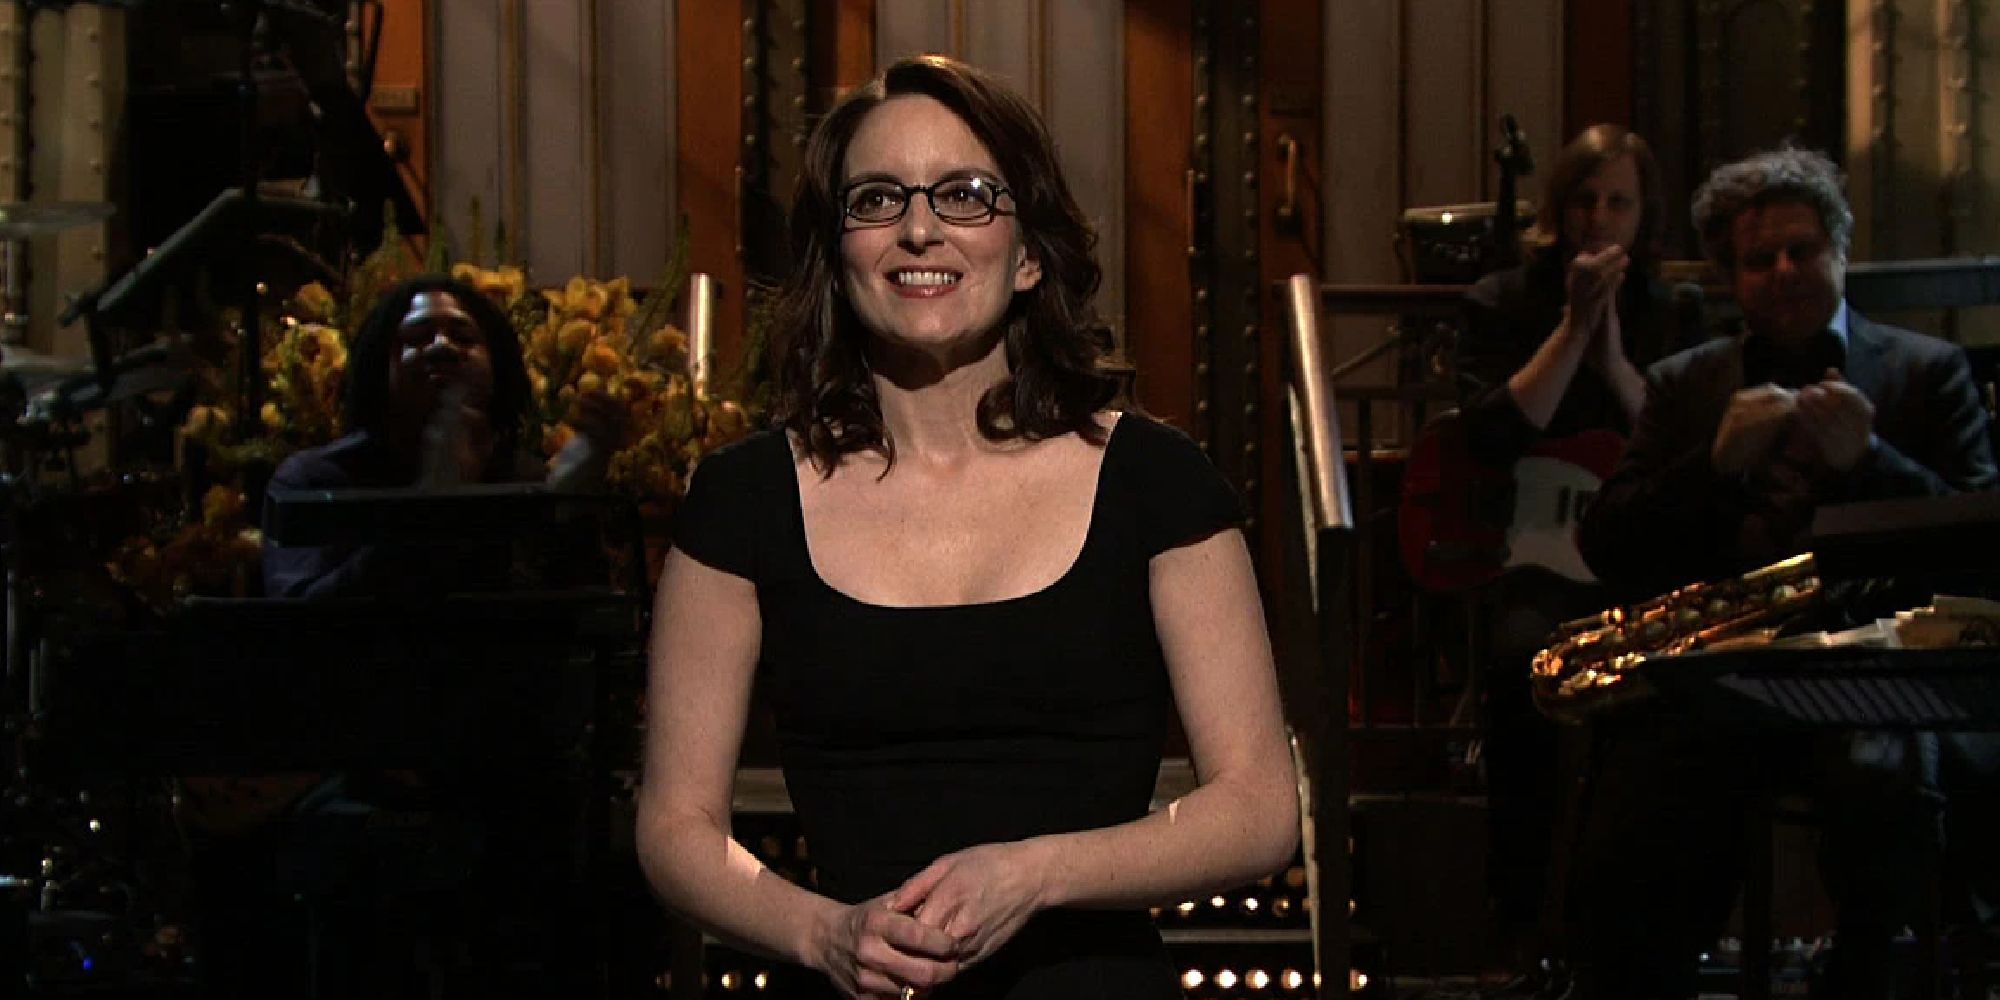 Tina Fey appearing in her monologue in 2008